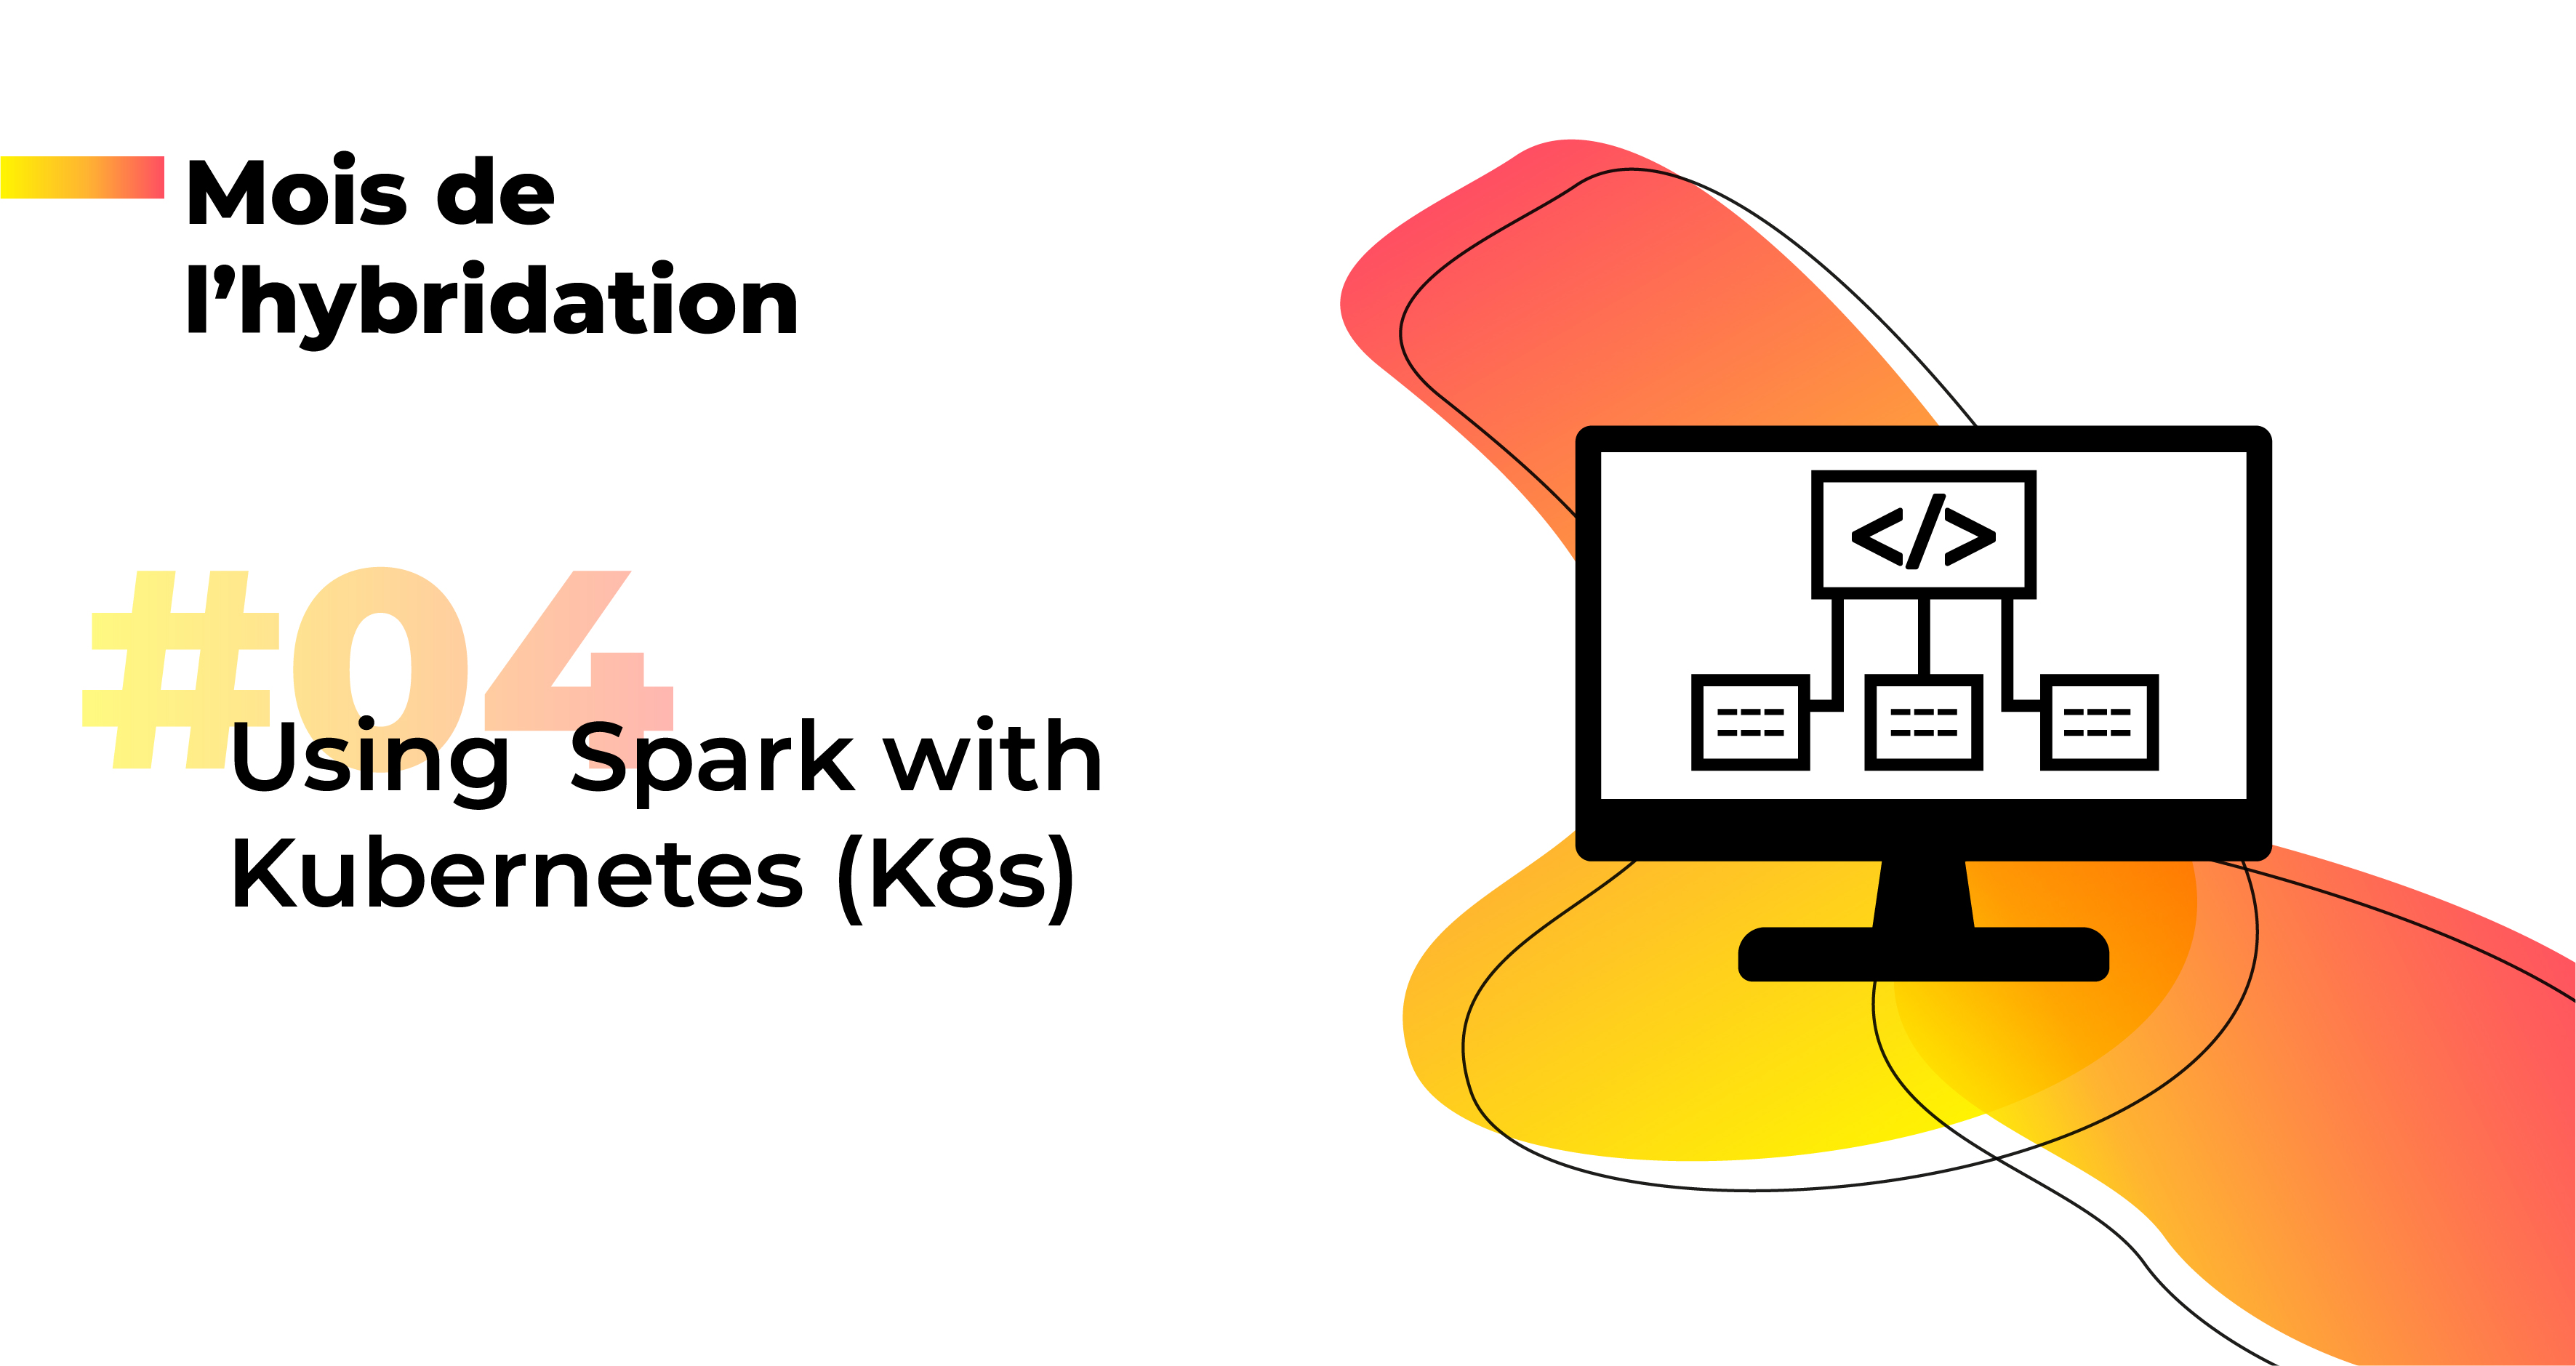 Using Spark with Kubernetes (K8s)